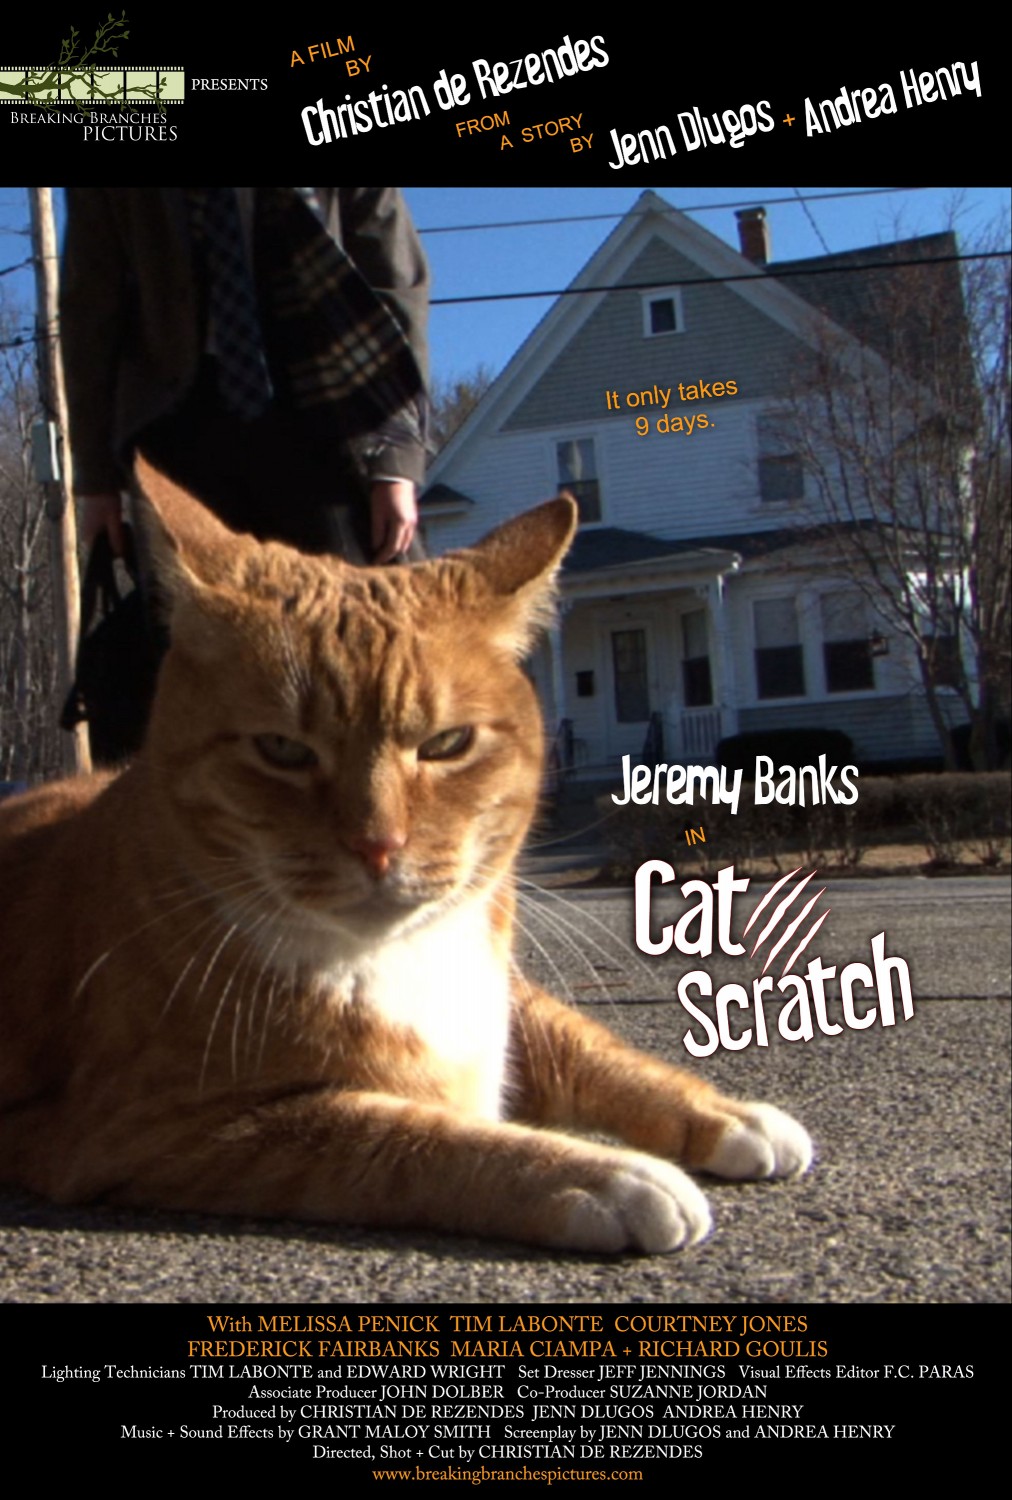 Extra Large Movie Poster Image for Cat Scratch